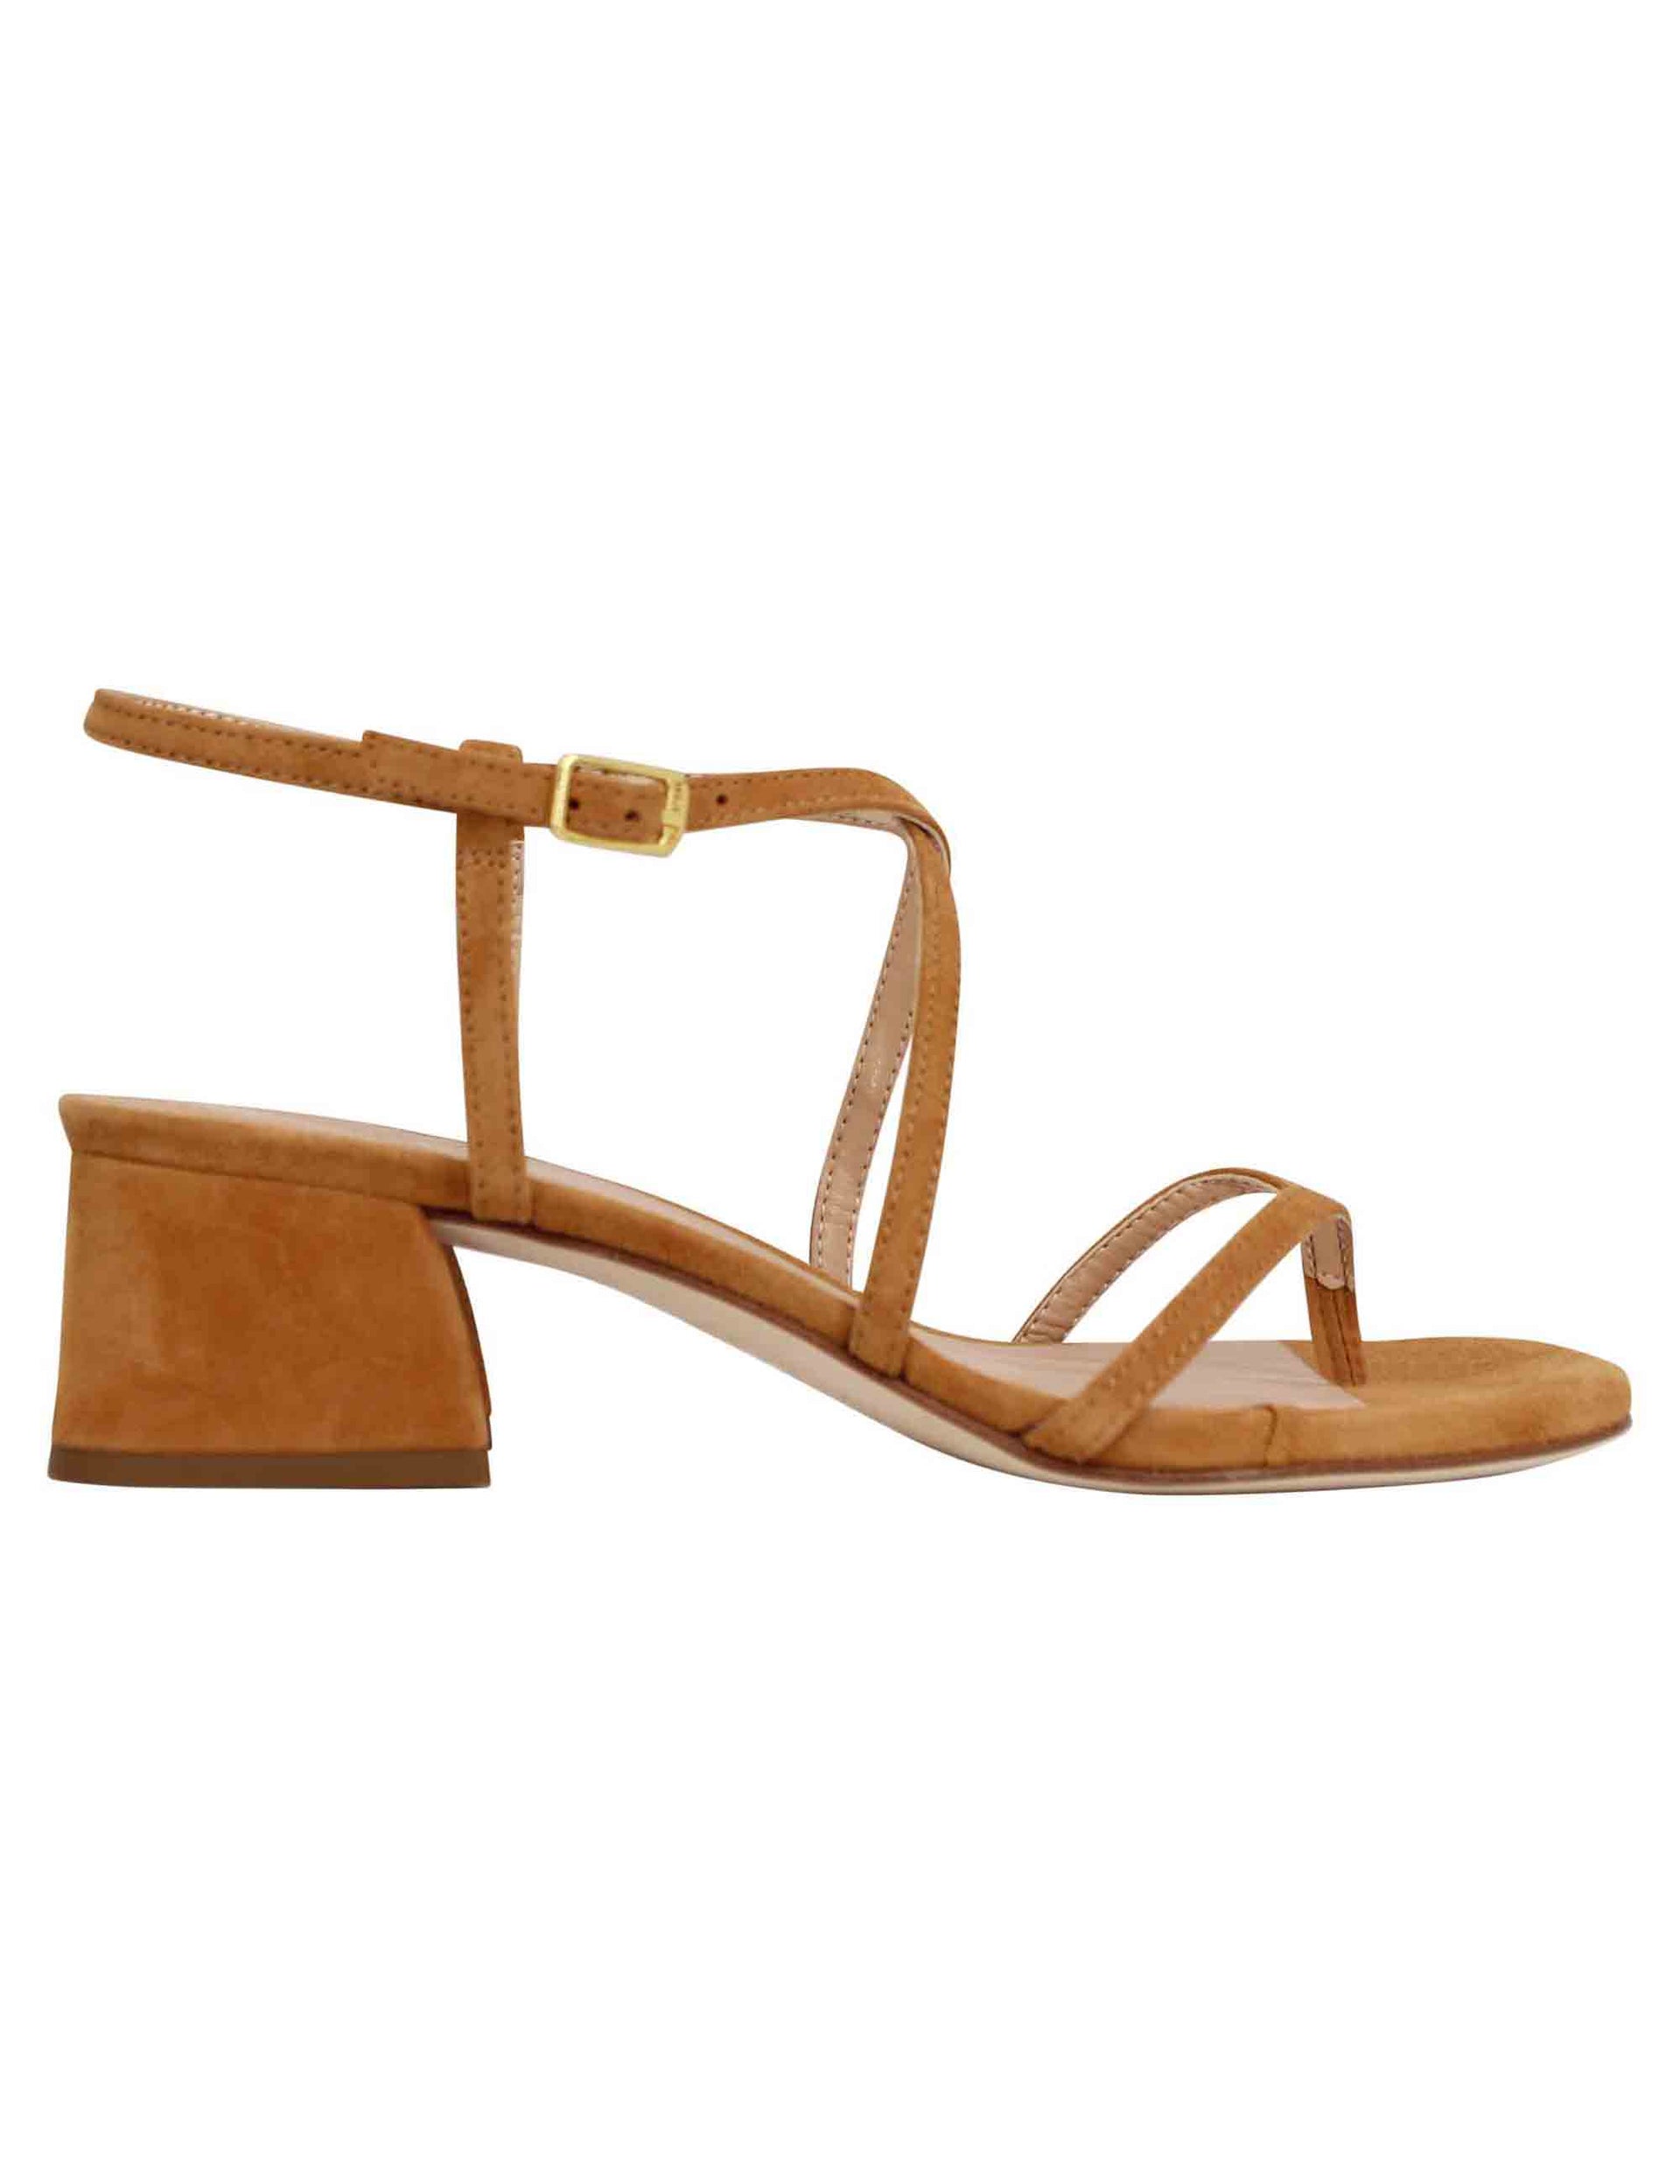 Women's flip-flop sandals in leather suede with ankle strap